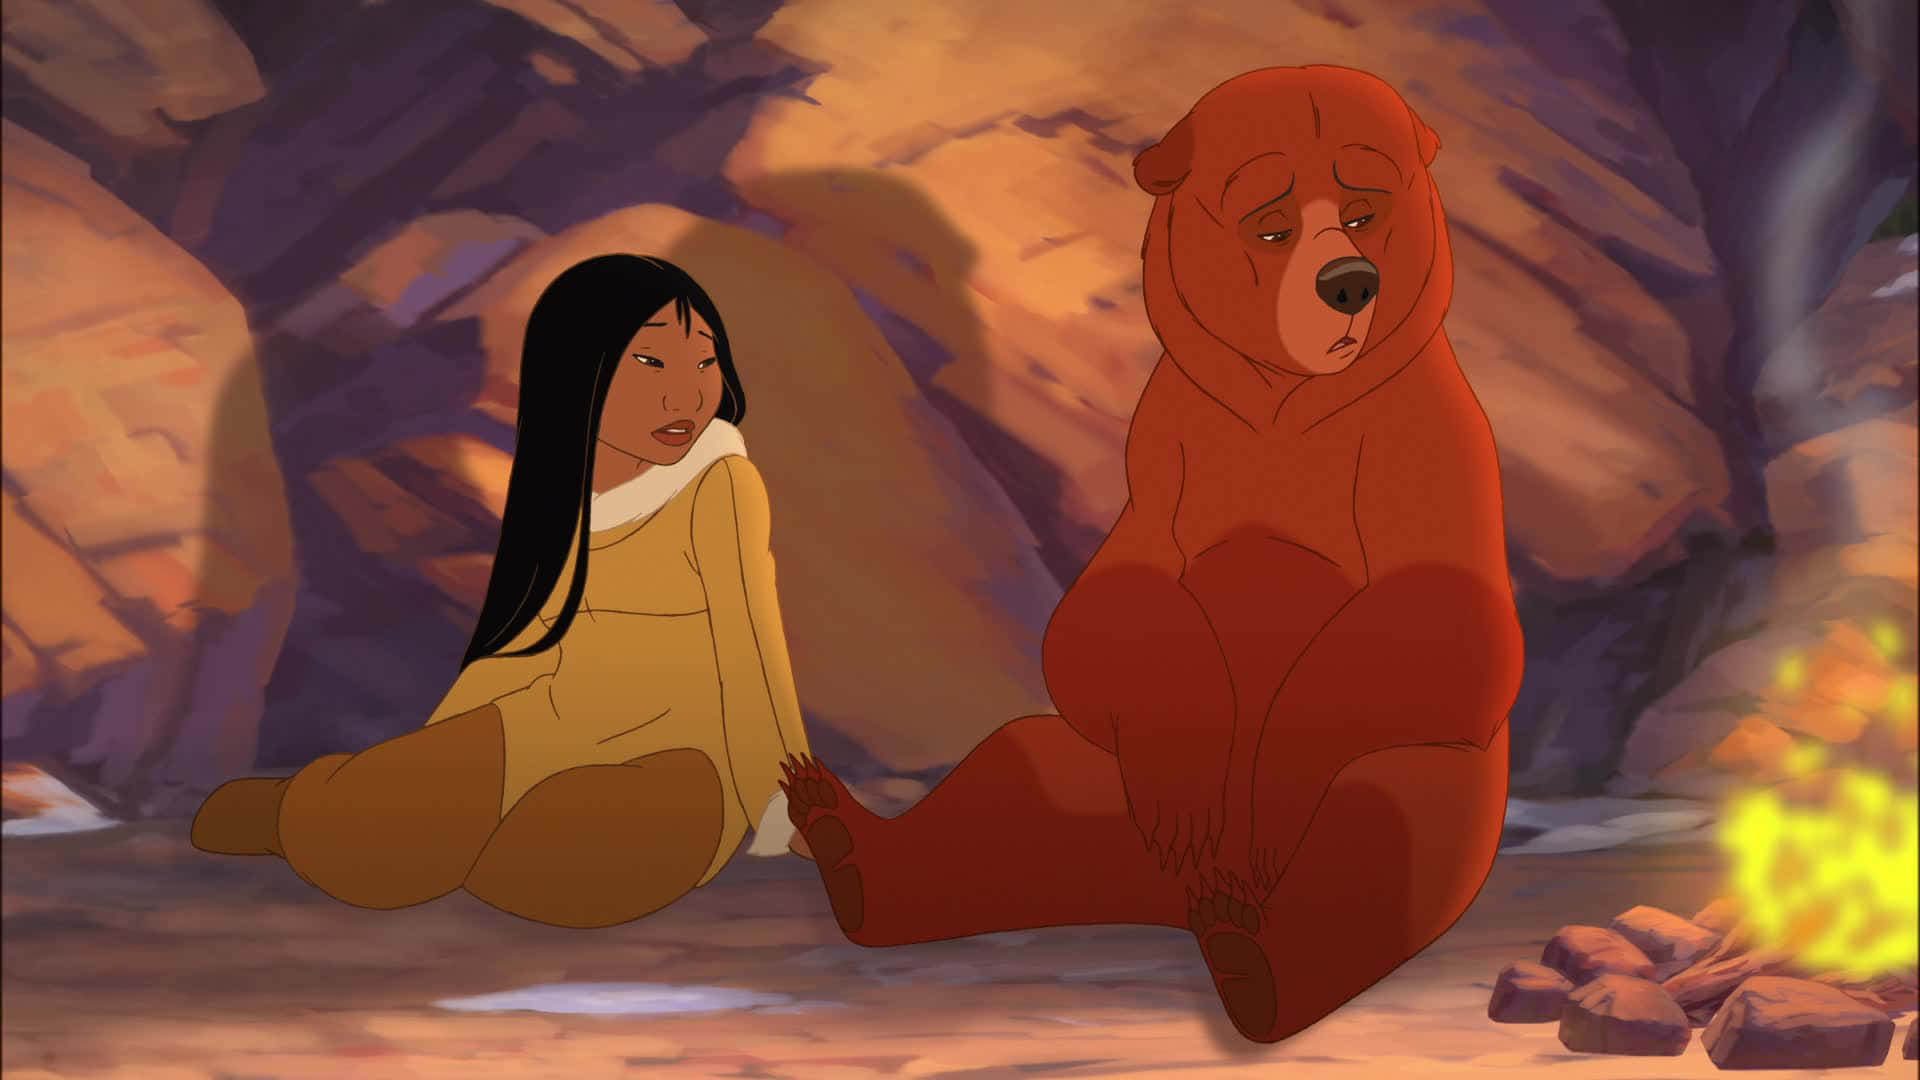 A Journey of Self-Discovery in Disney's Brother Bear